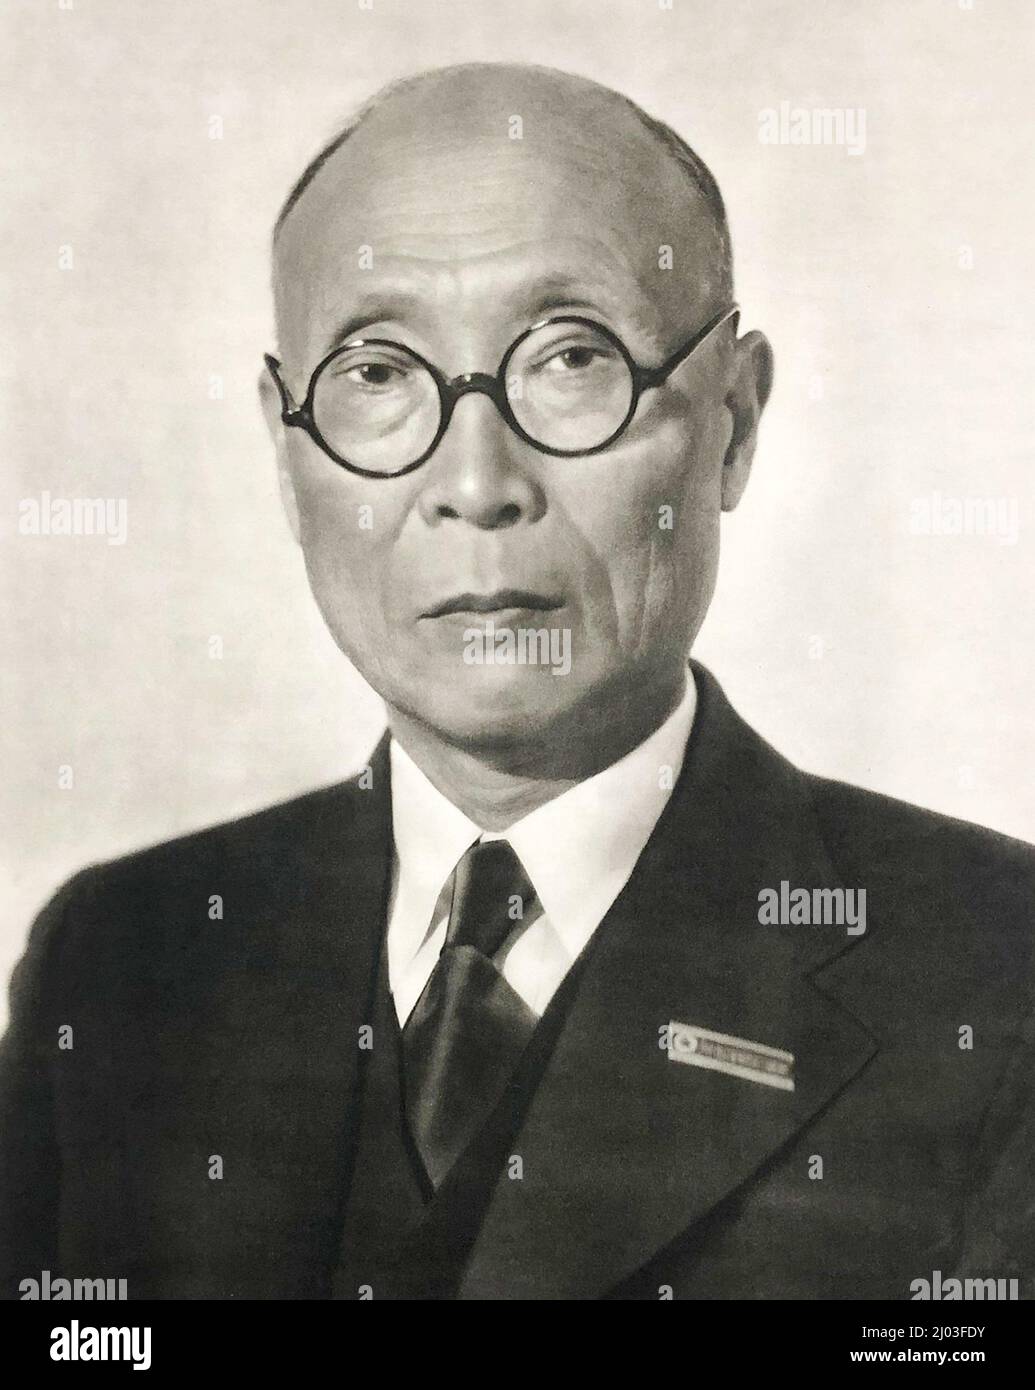 Photo portrait of Kim Tu-bong (1889 - 1958). He was the first Chairman of the Workers' Party of North Korea (a predecessor of today WPK) from 1946 to 1949. Stock Photo